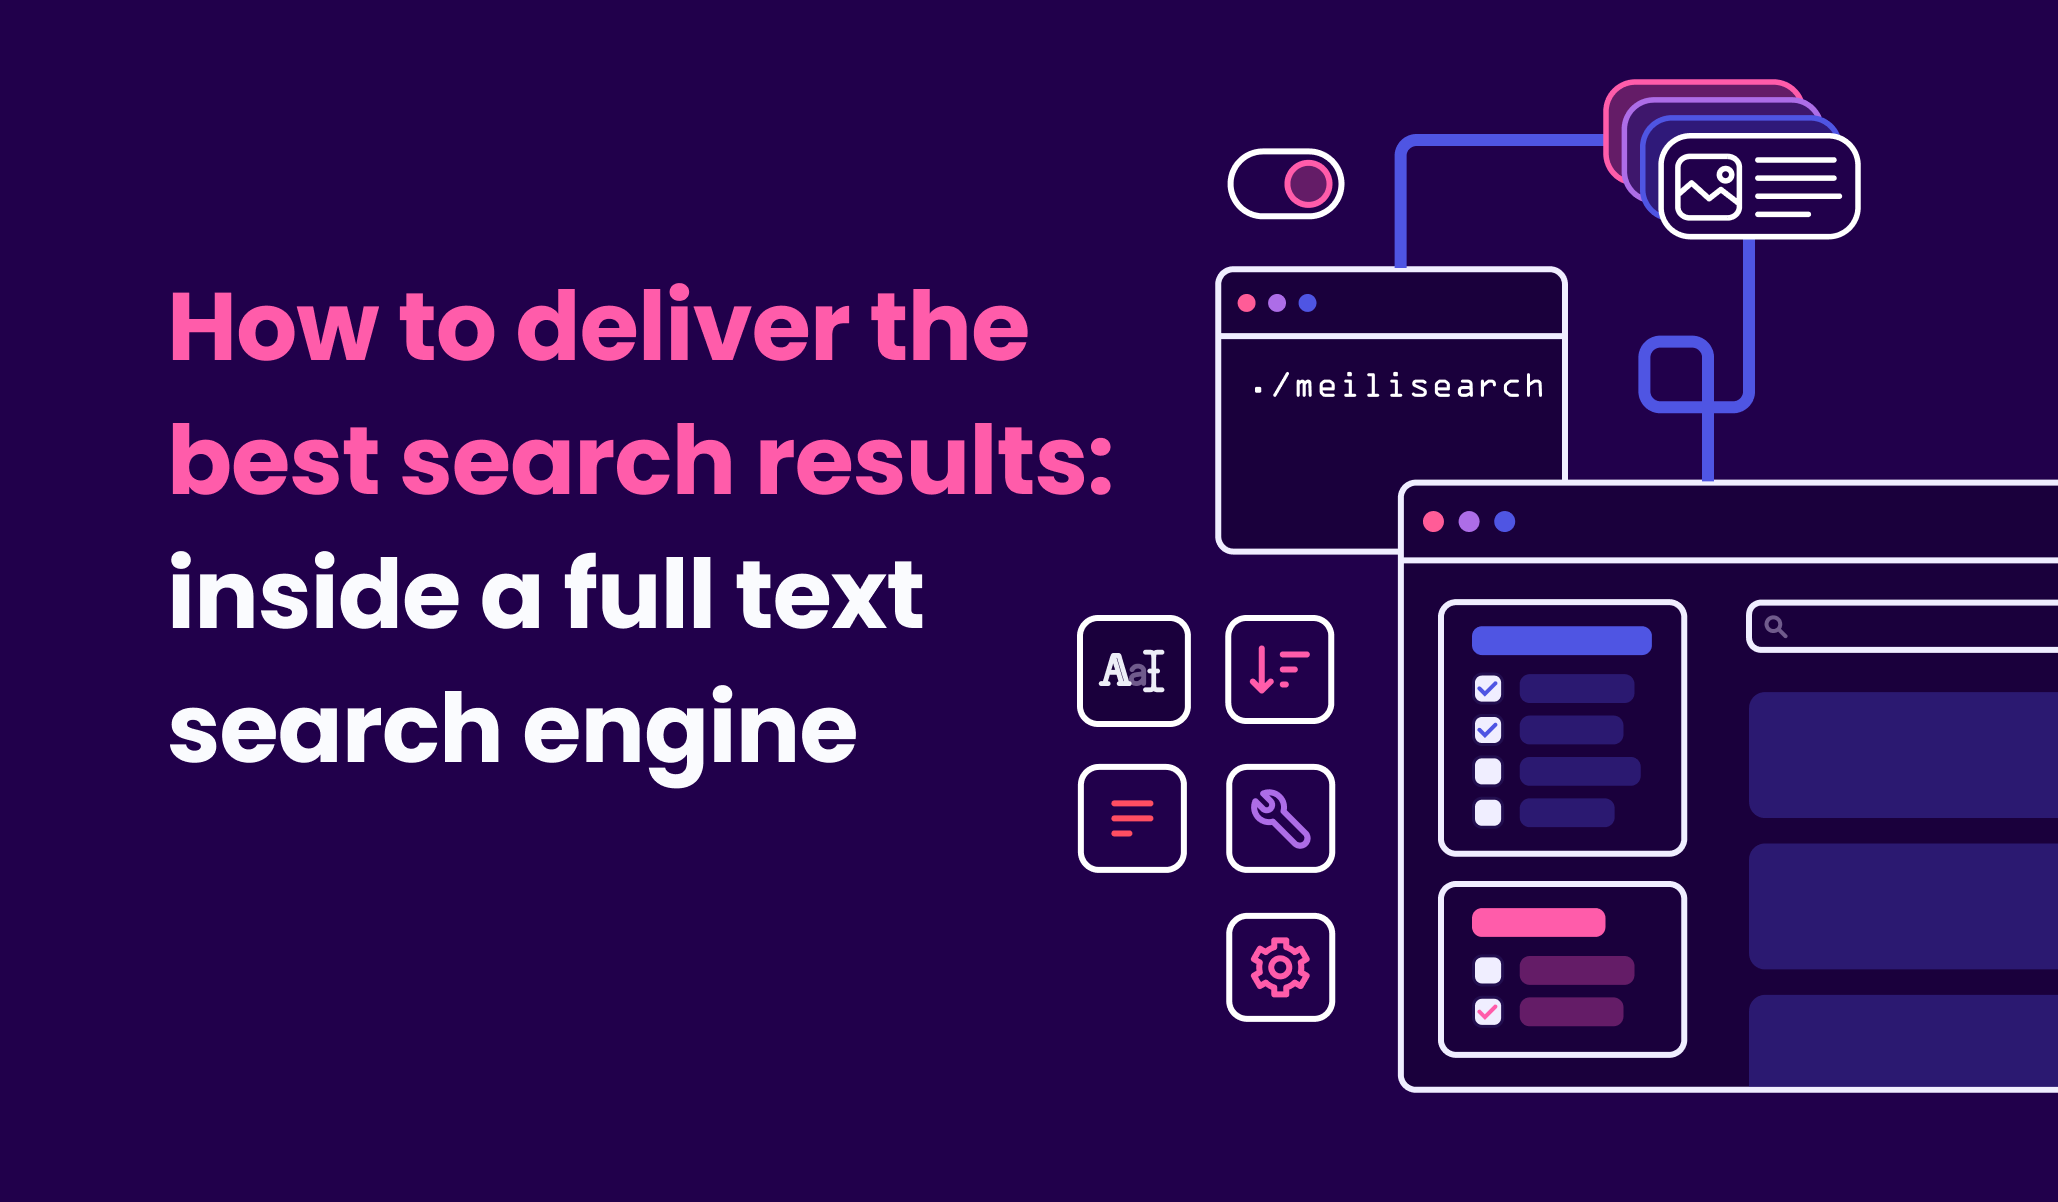 How To Deliver The Best Search Results Inside A Full Text Search Engine